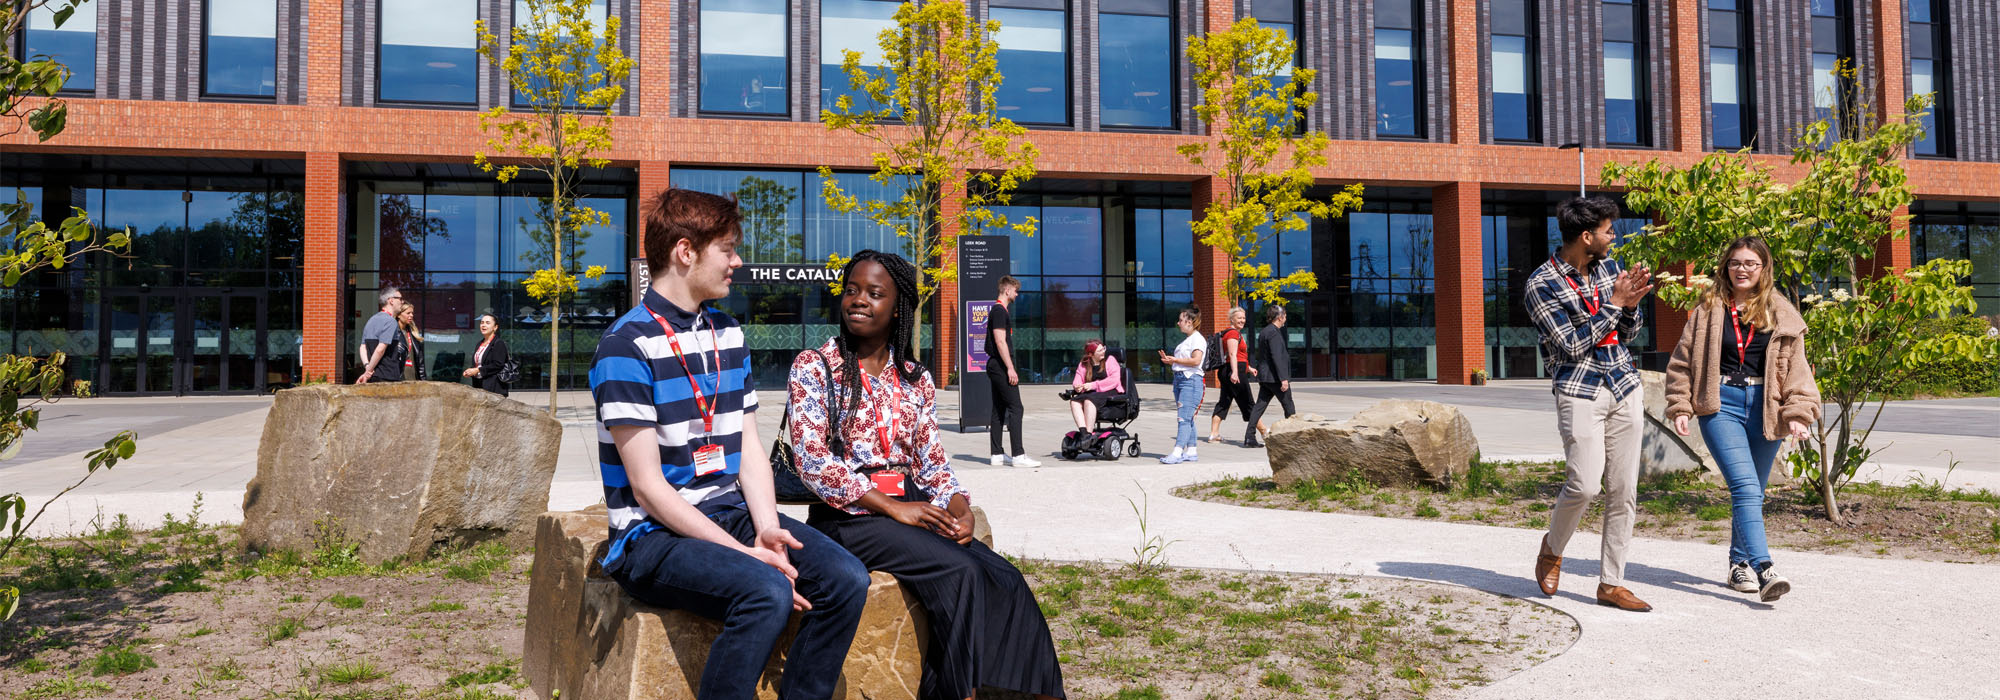 A diverse group of students wearing casual clothes socialising outside the front of the Catalyst building